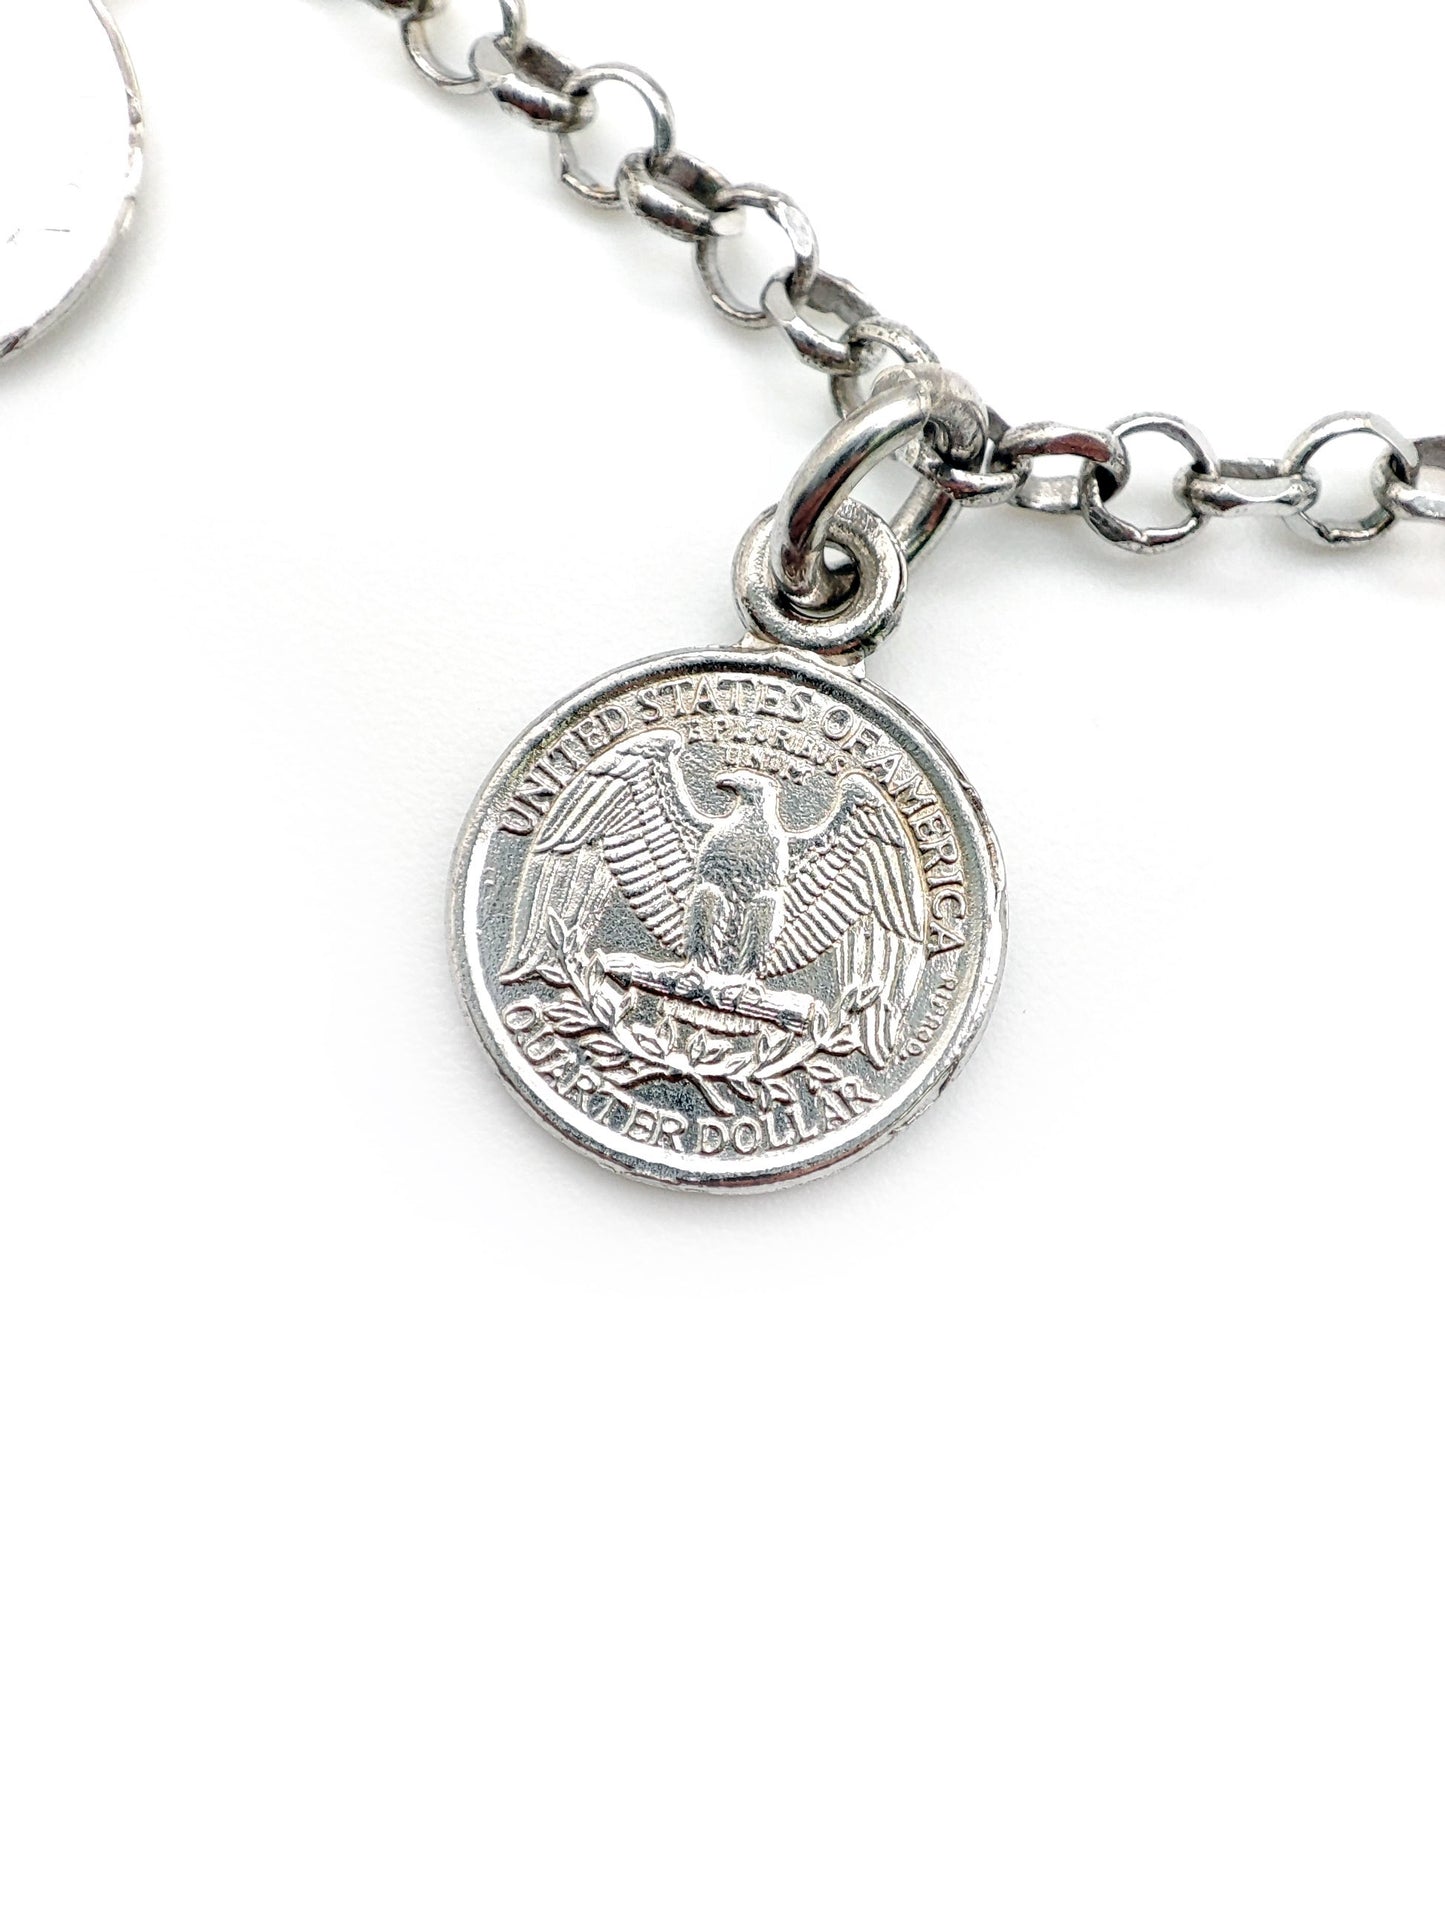 Silver bracelet with American coins